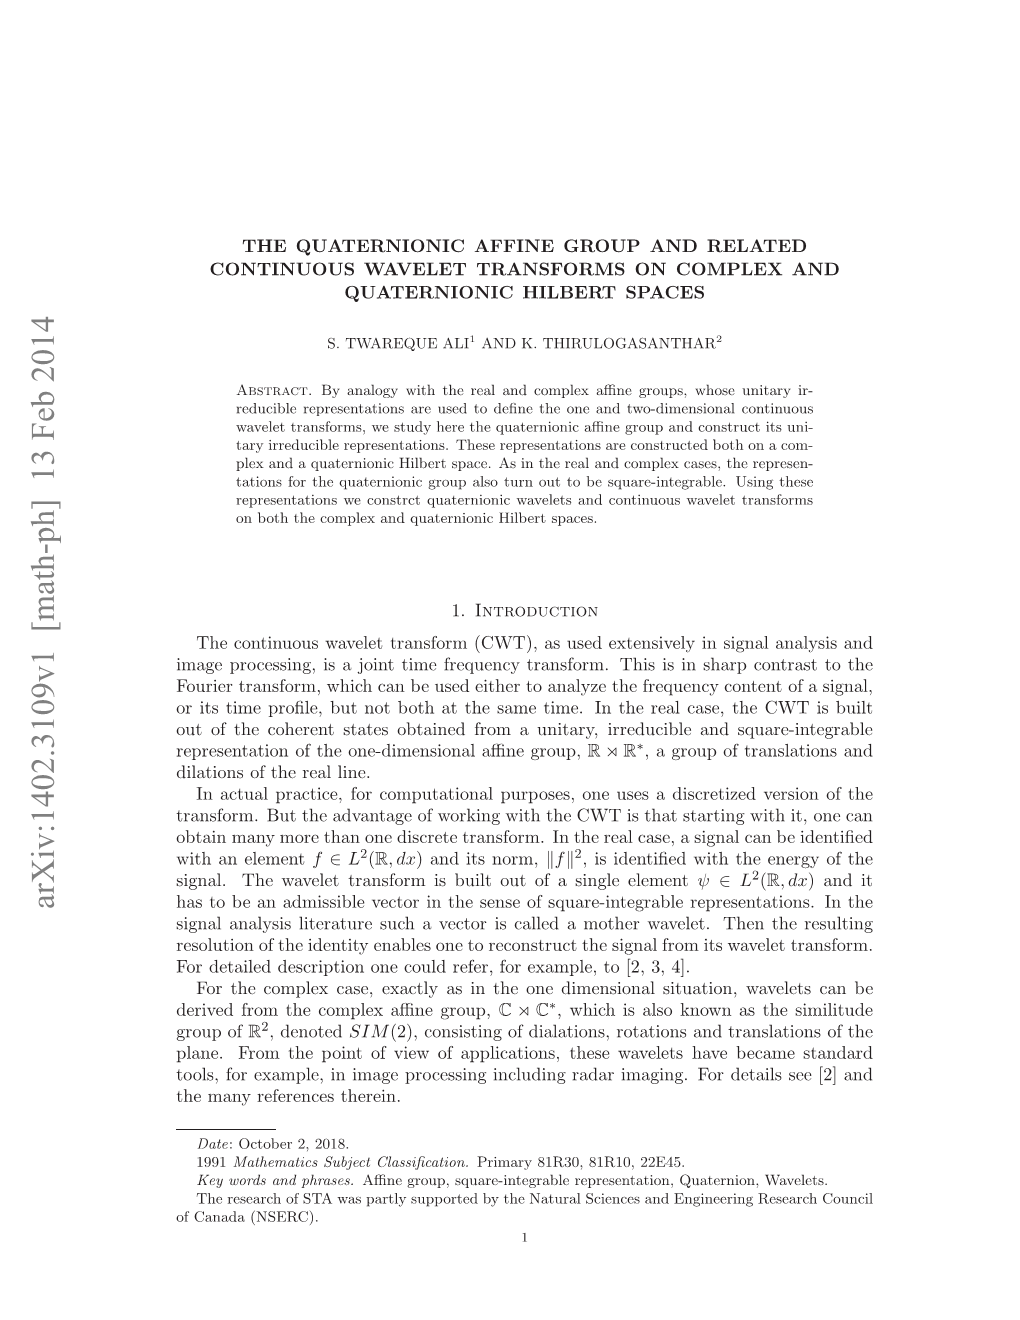 The Quaternionic Affine Group and Related Continuous Wavelet